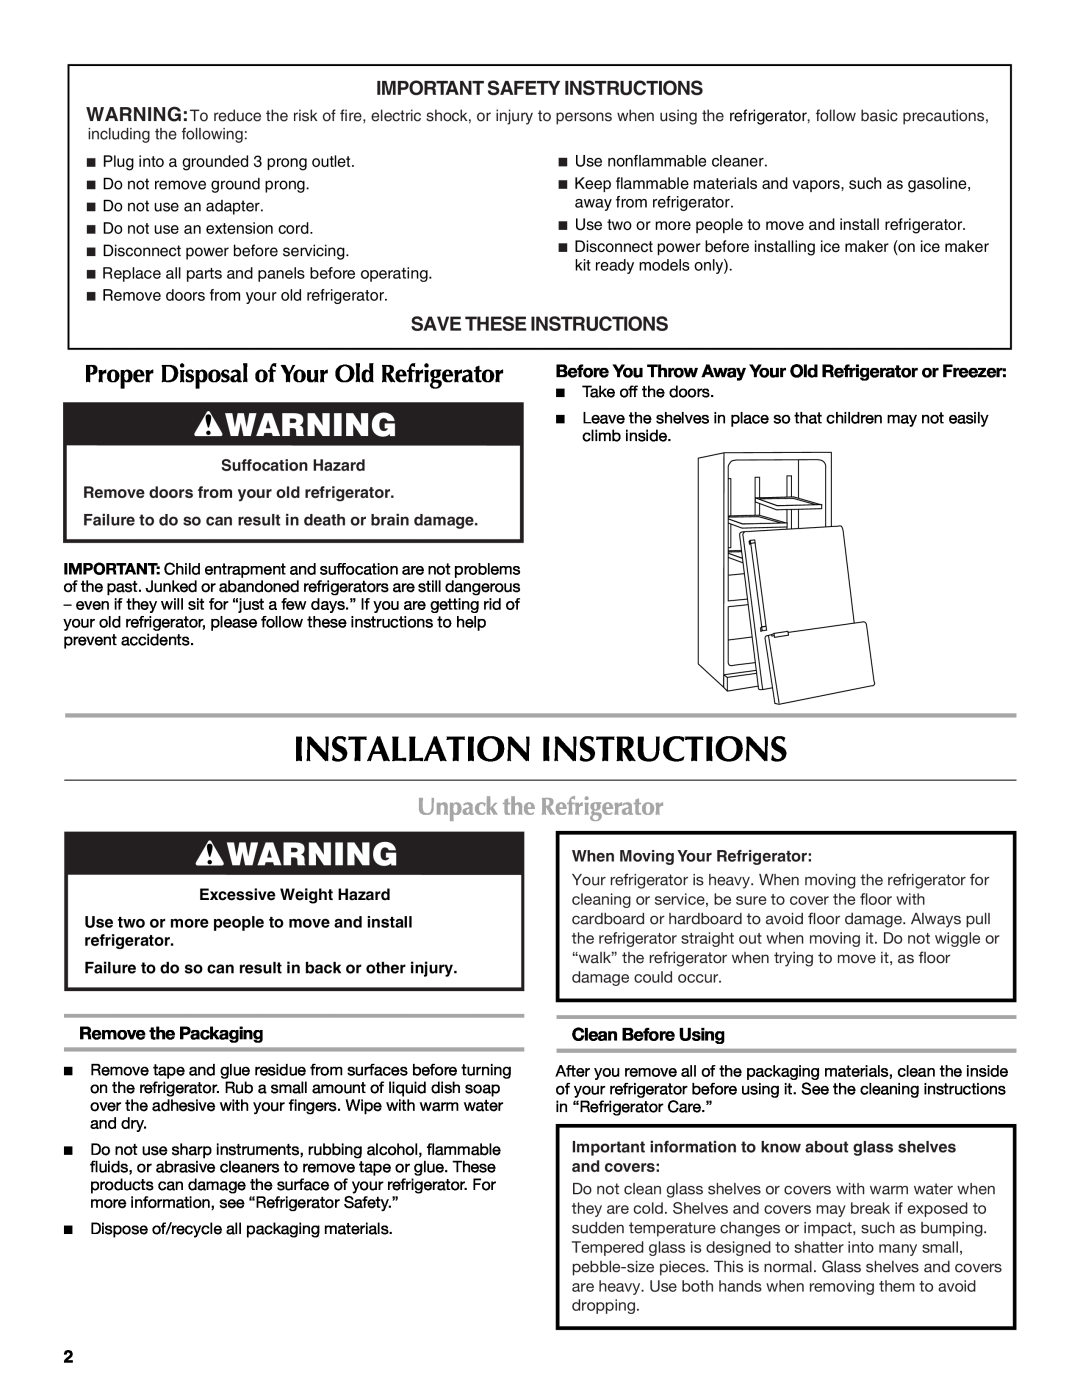 Maytag MBL2258XES Installation Instructions, Unpack the Refrigerator, Important Safety Instructions, Remove the Packaging 